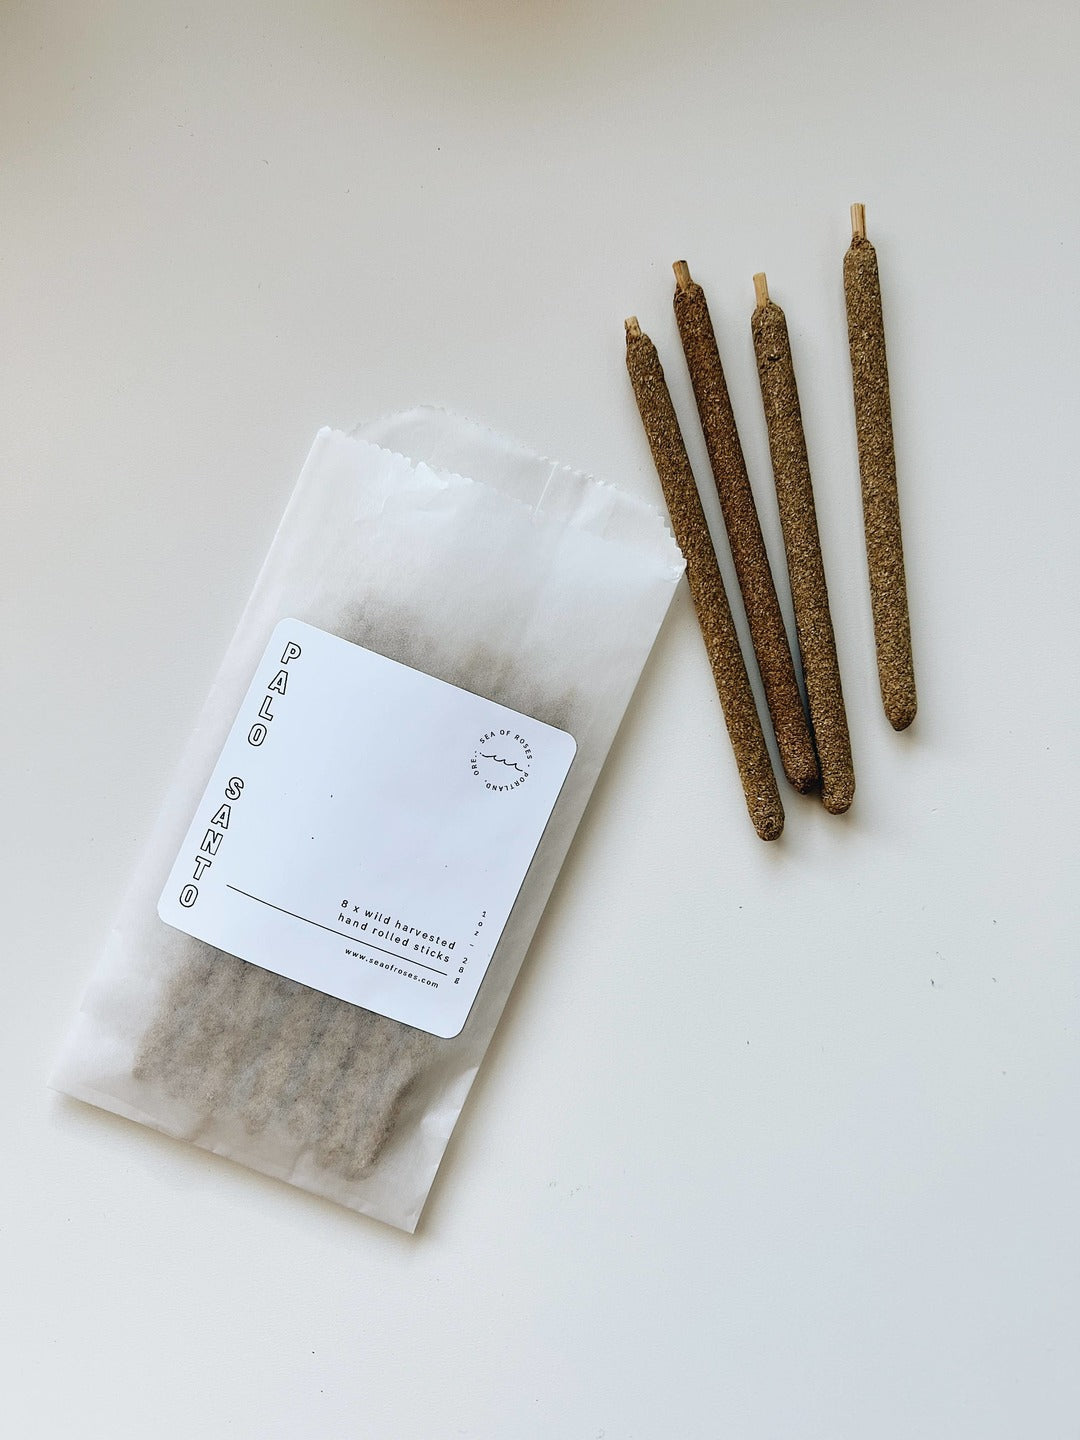 Palo santo hand rolled incense